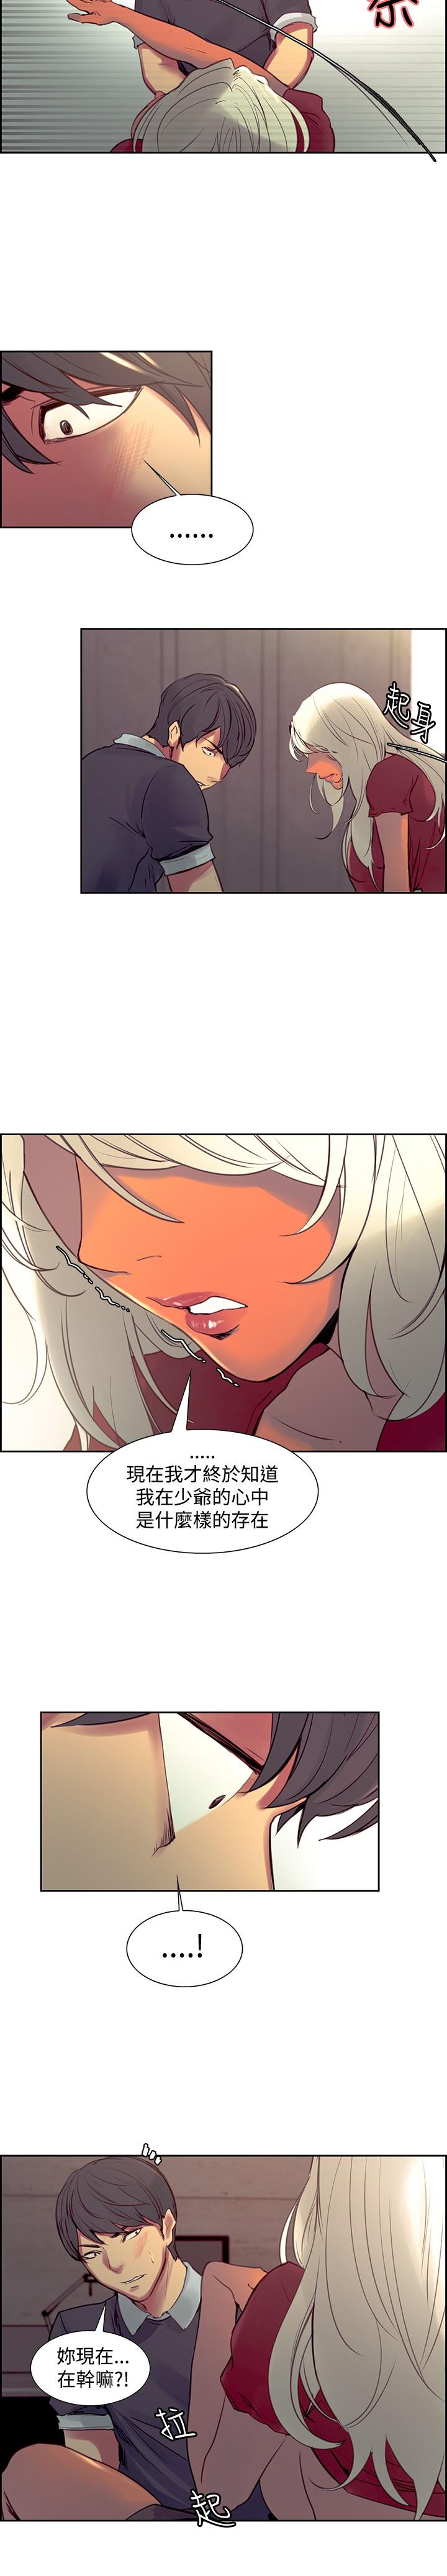 [Serious] Domesticate the Housekeeper 调教家政妇 Ch.29~44END [Chinese]中文 85